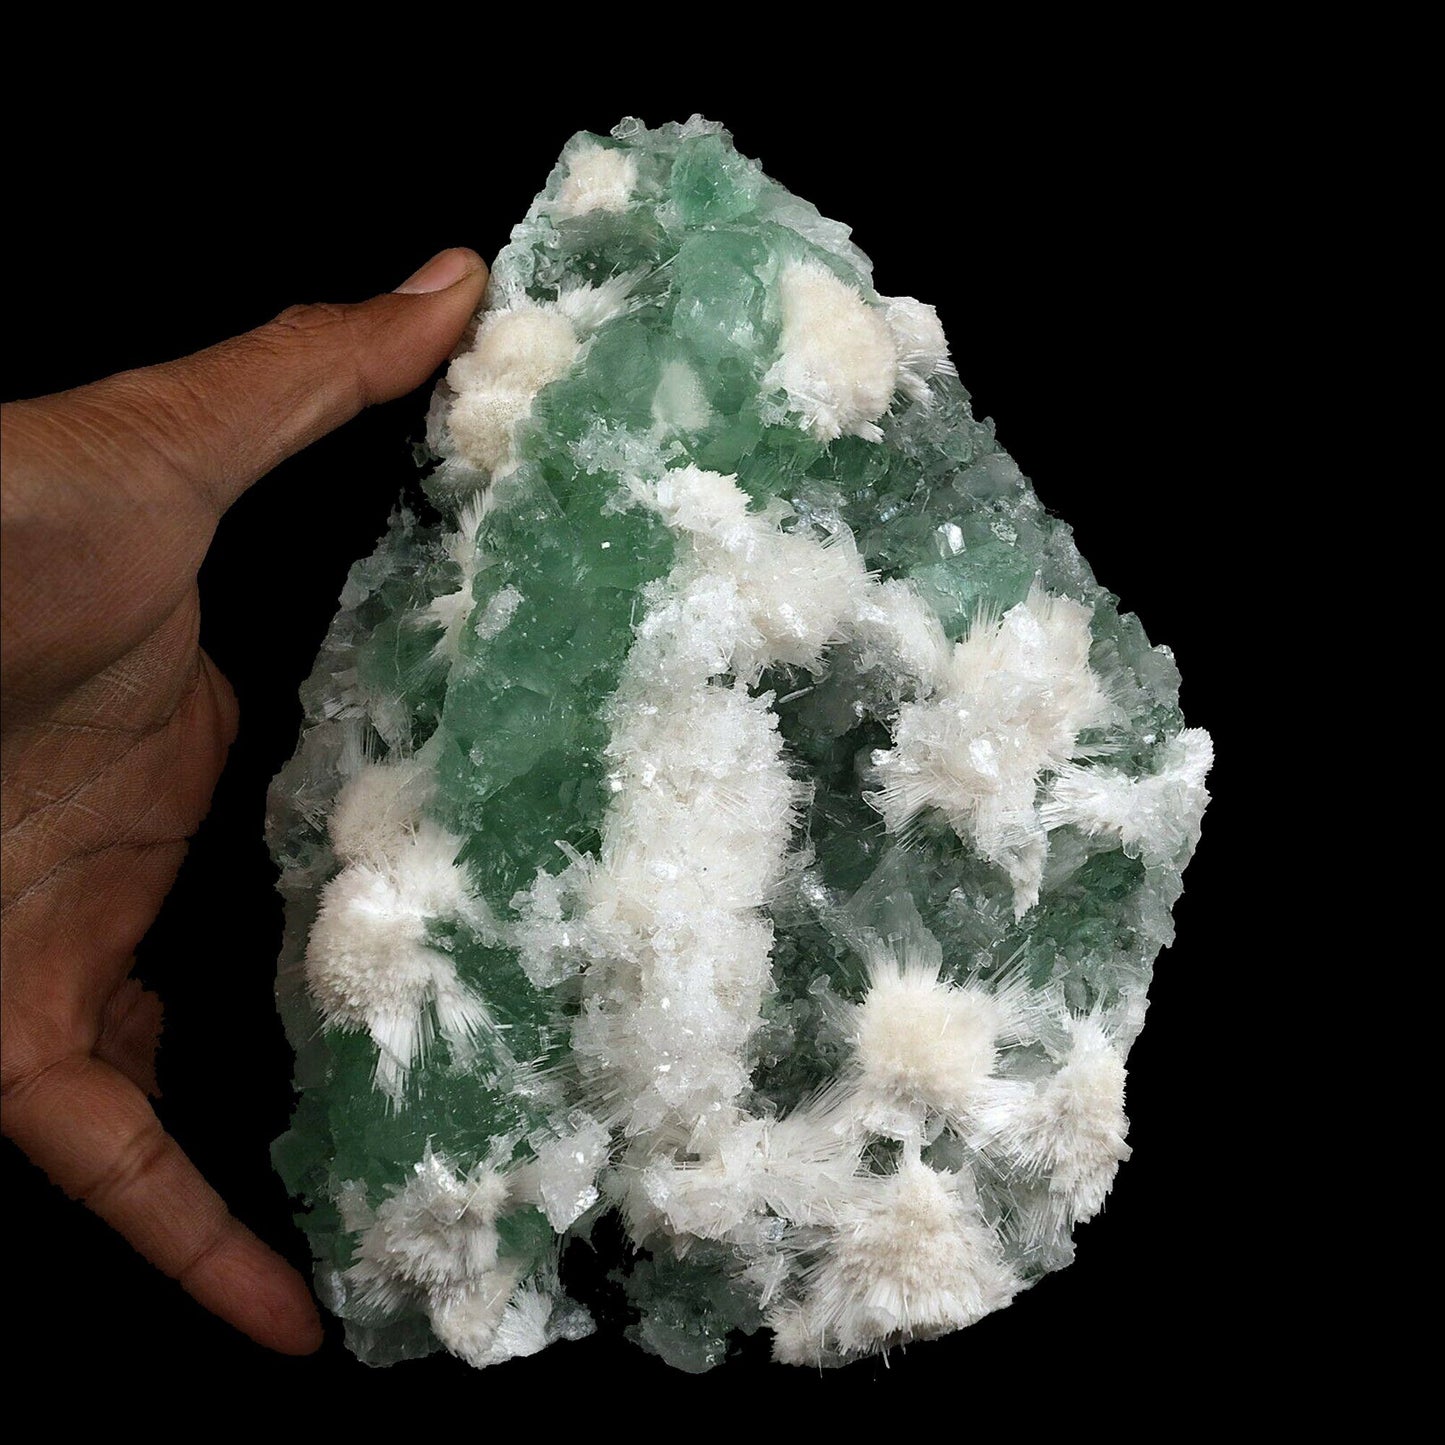 Apophyllite green with Scolecite on Chalcedony A Real Attention Grabbe…  https://www.superbminerals.us/products/apophyllite-green-with-scolecite-on-chalcedony-natural-mineral-specimen-b-3741  Features:This is worthy of center piece status in any mineral collection. Its first feature is size - a whopping 20 by 14 cm and 1.560 kg which qualifies it for that rare super extra large status which Mineralium specializes in. The next feature is sculptural snowy white needle-like scolecite which forms radiating ros